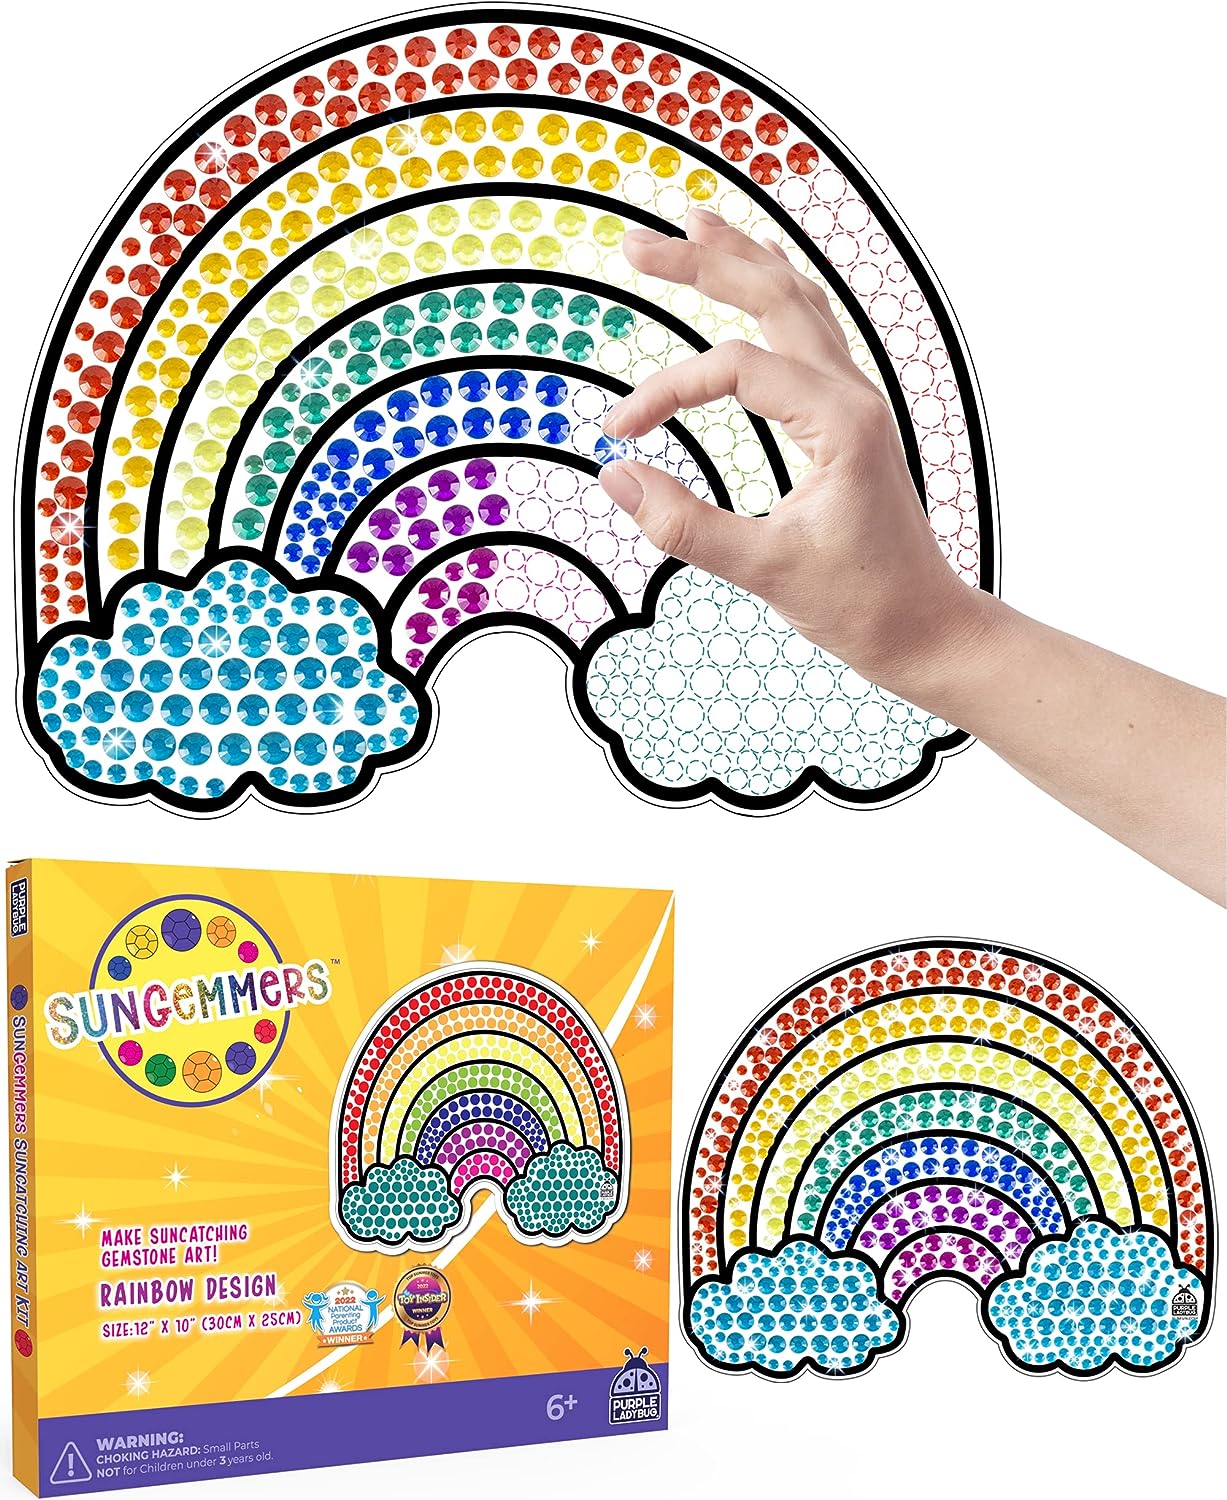 Create Window Art that Sparkles in the Sun with SunGemmers Sun Catchers -  The Toy Insider